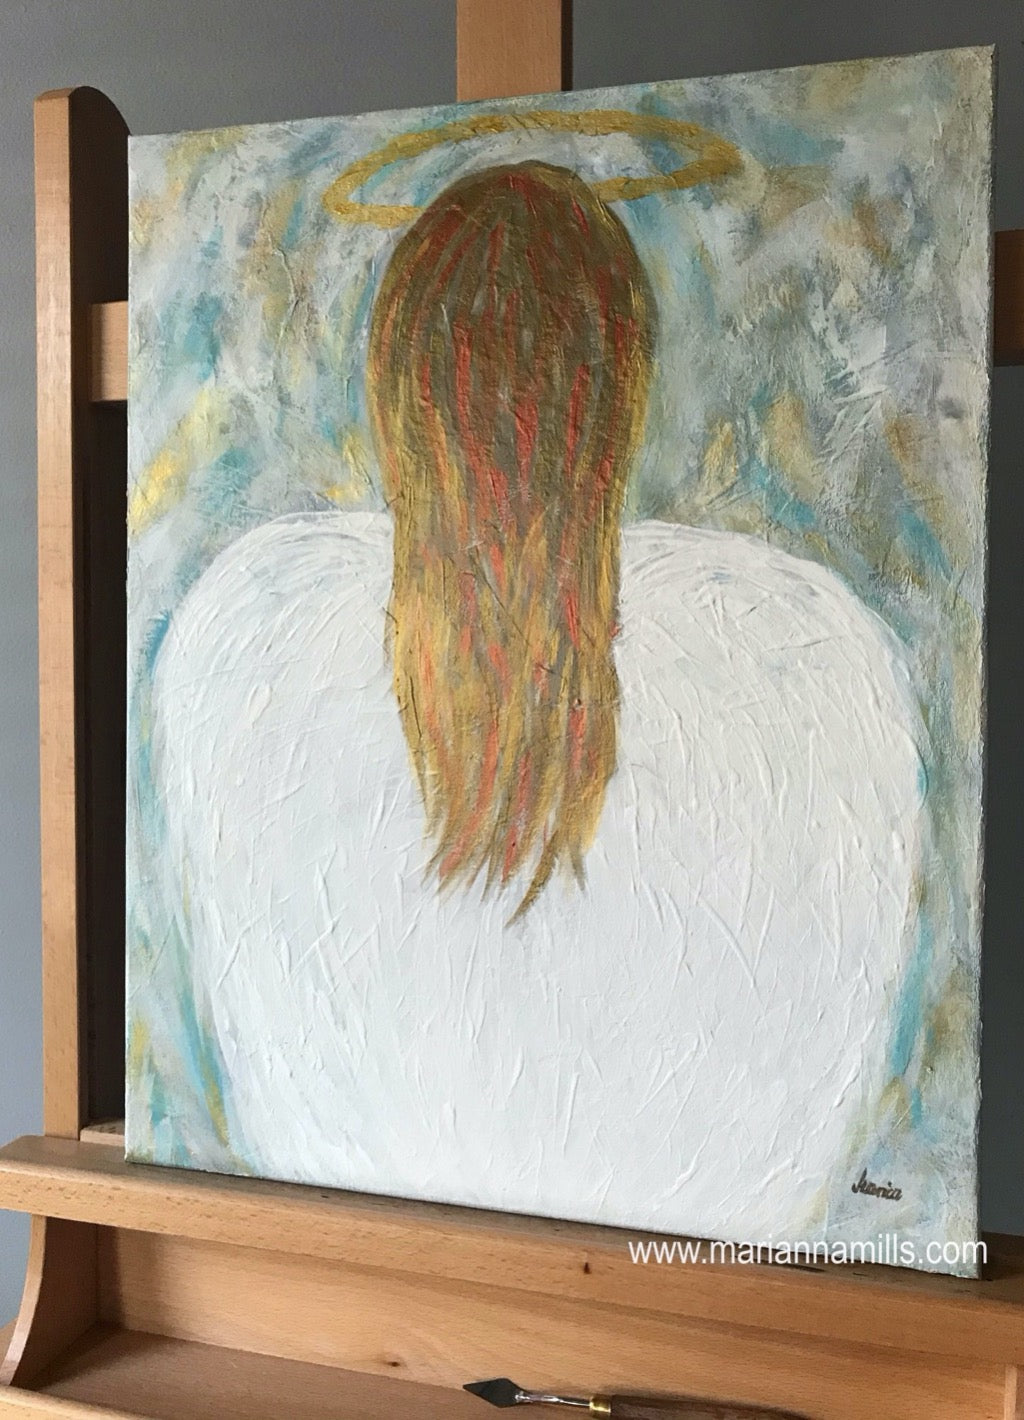 My Angel - Why did you turn your back on me..? - 16x20 inches original figurative acrylic impasto painting by Marianna Mills